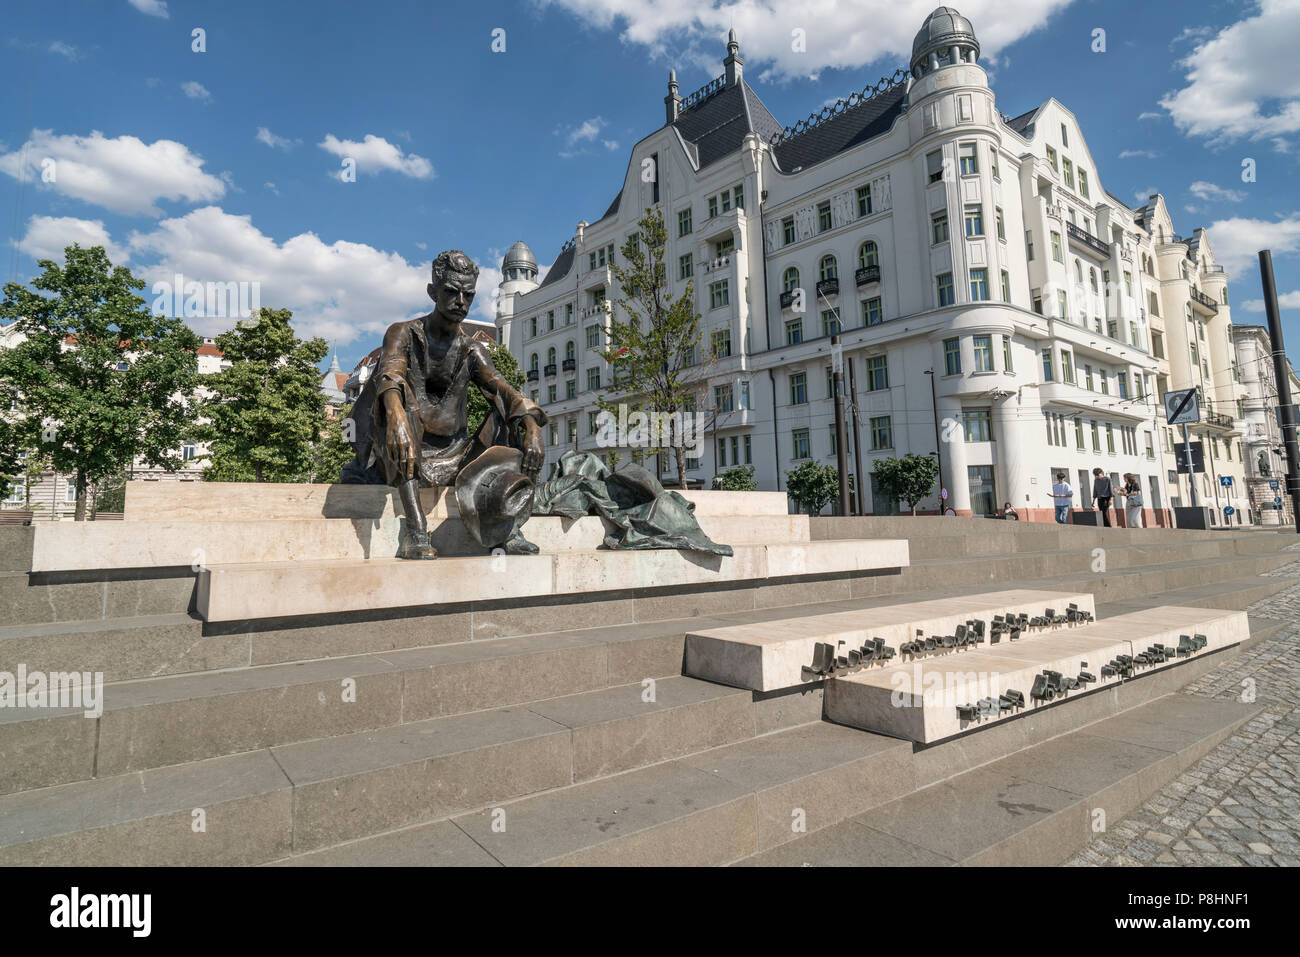 The statue of Attila József in Kossuth Square in Budapest, Hungary Stock Photo